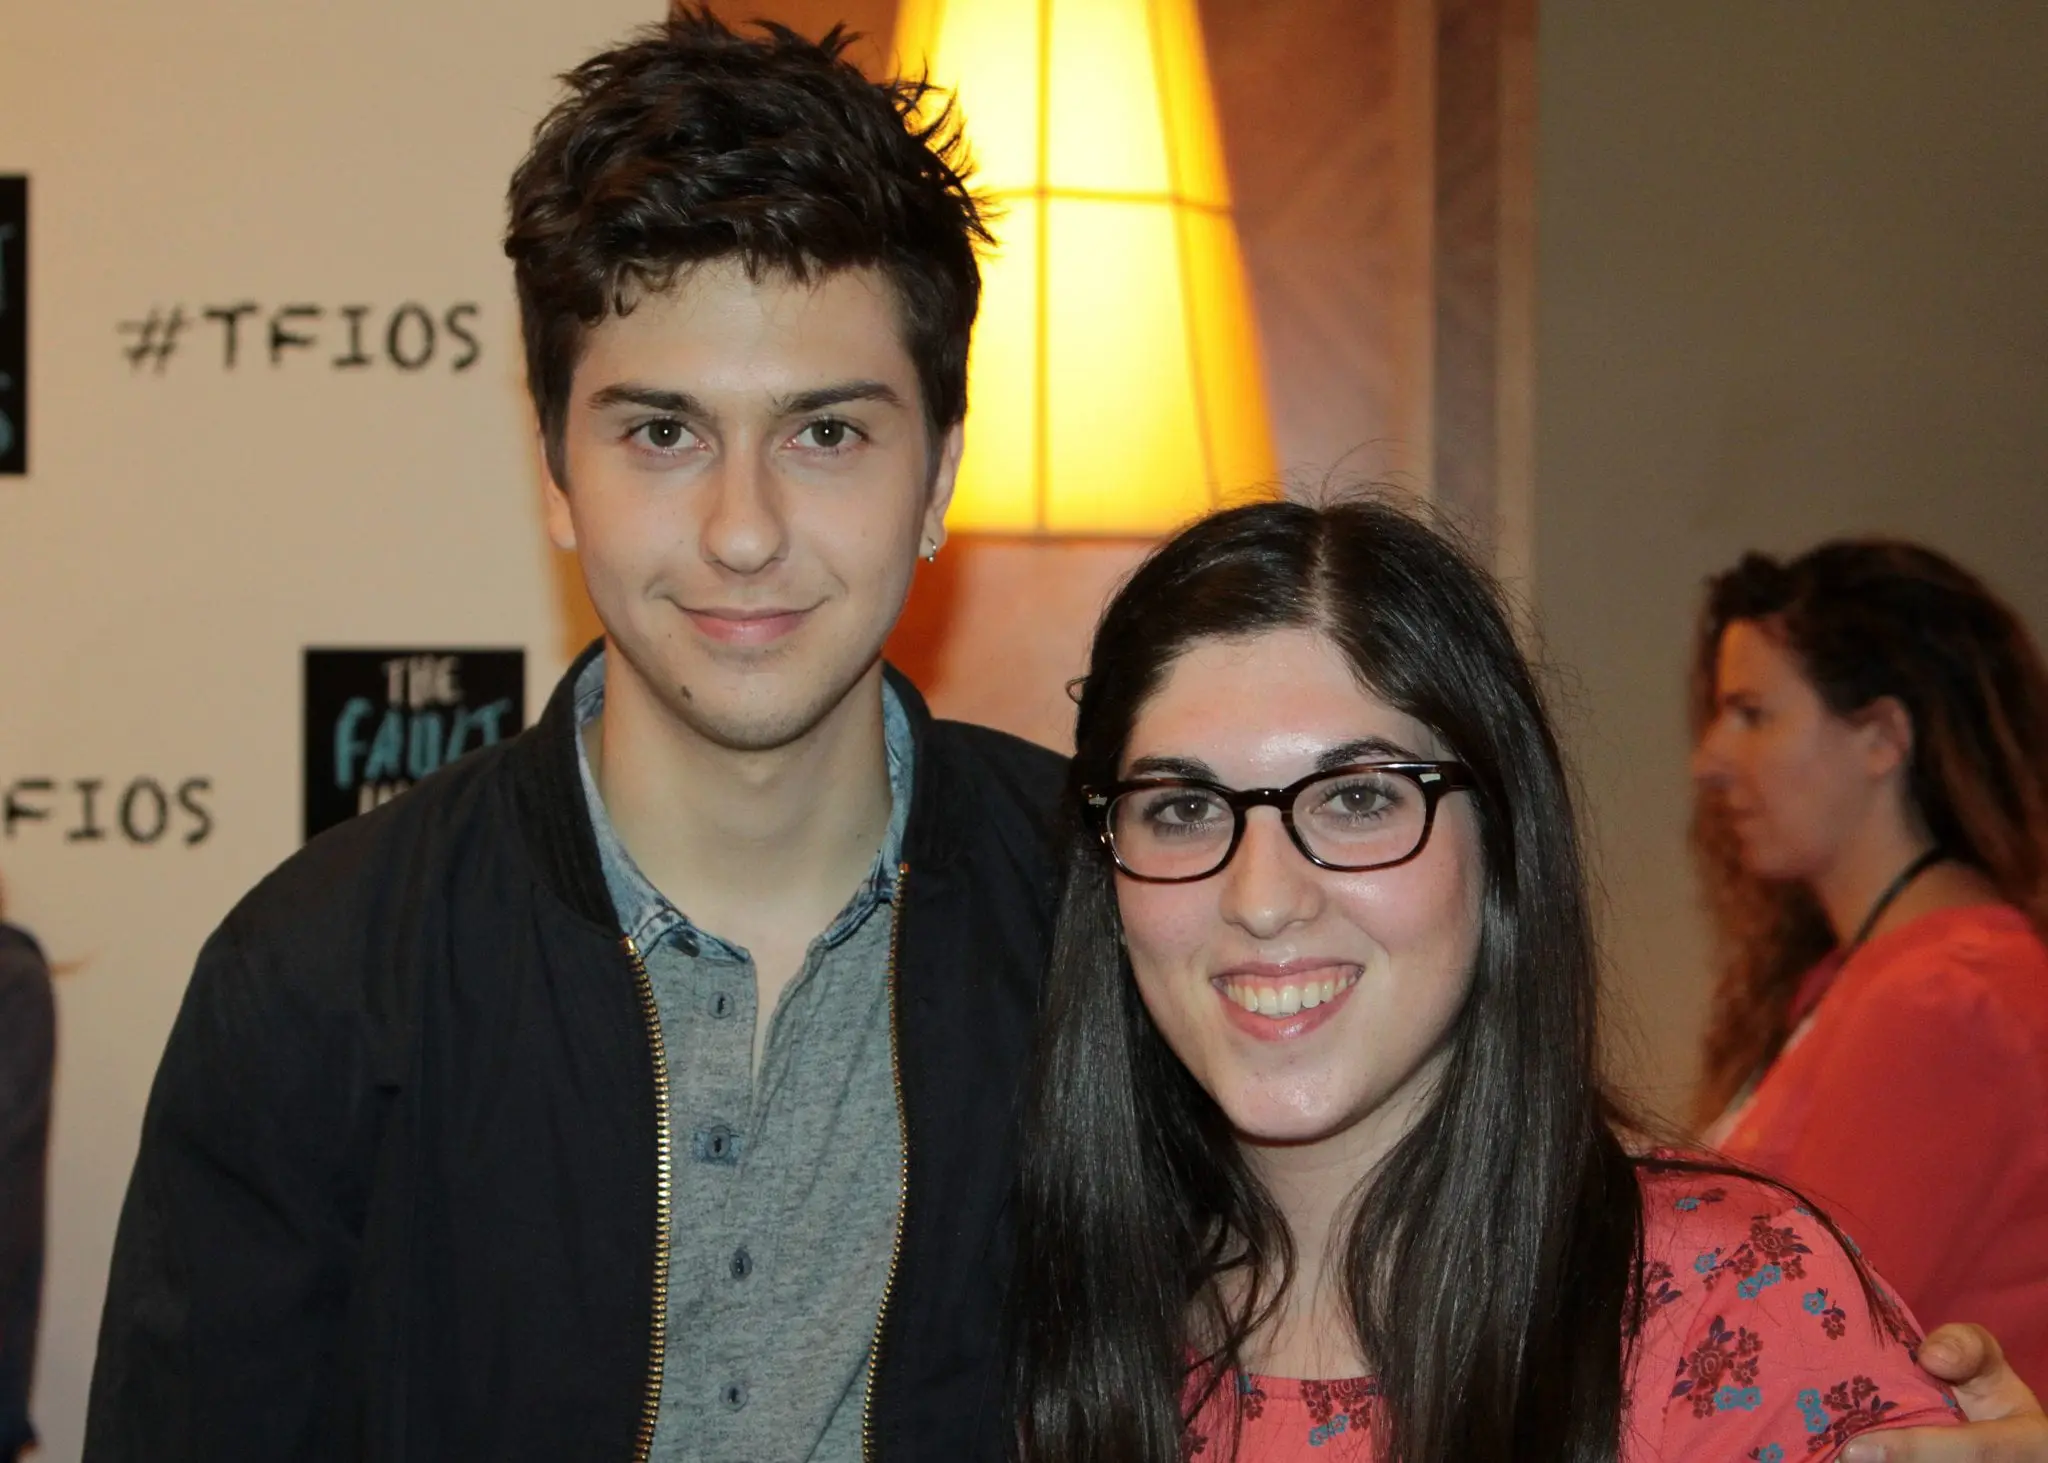 our intern posing with Nat Woolf at The Fault in our Stars opening